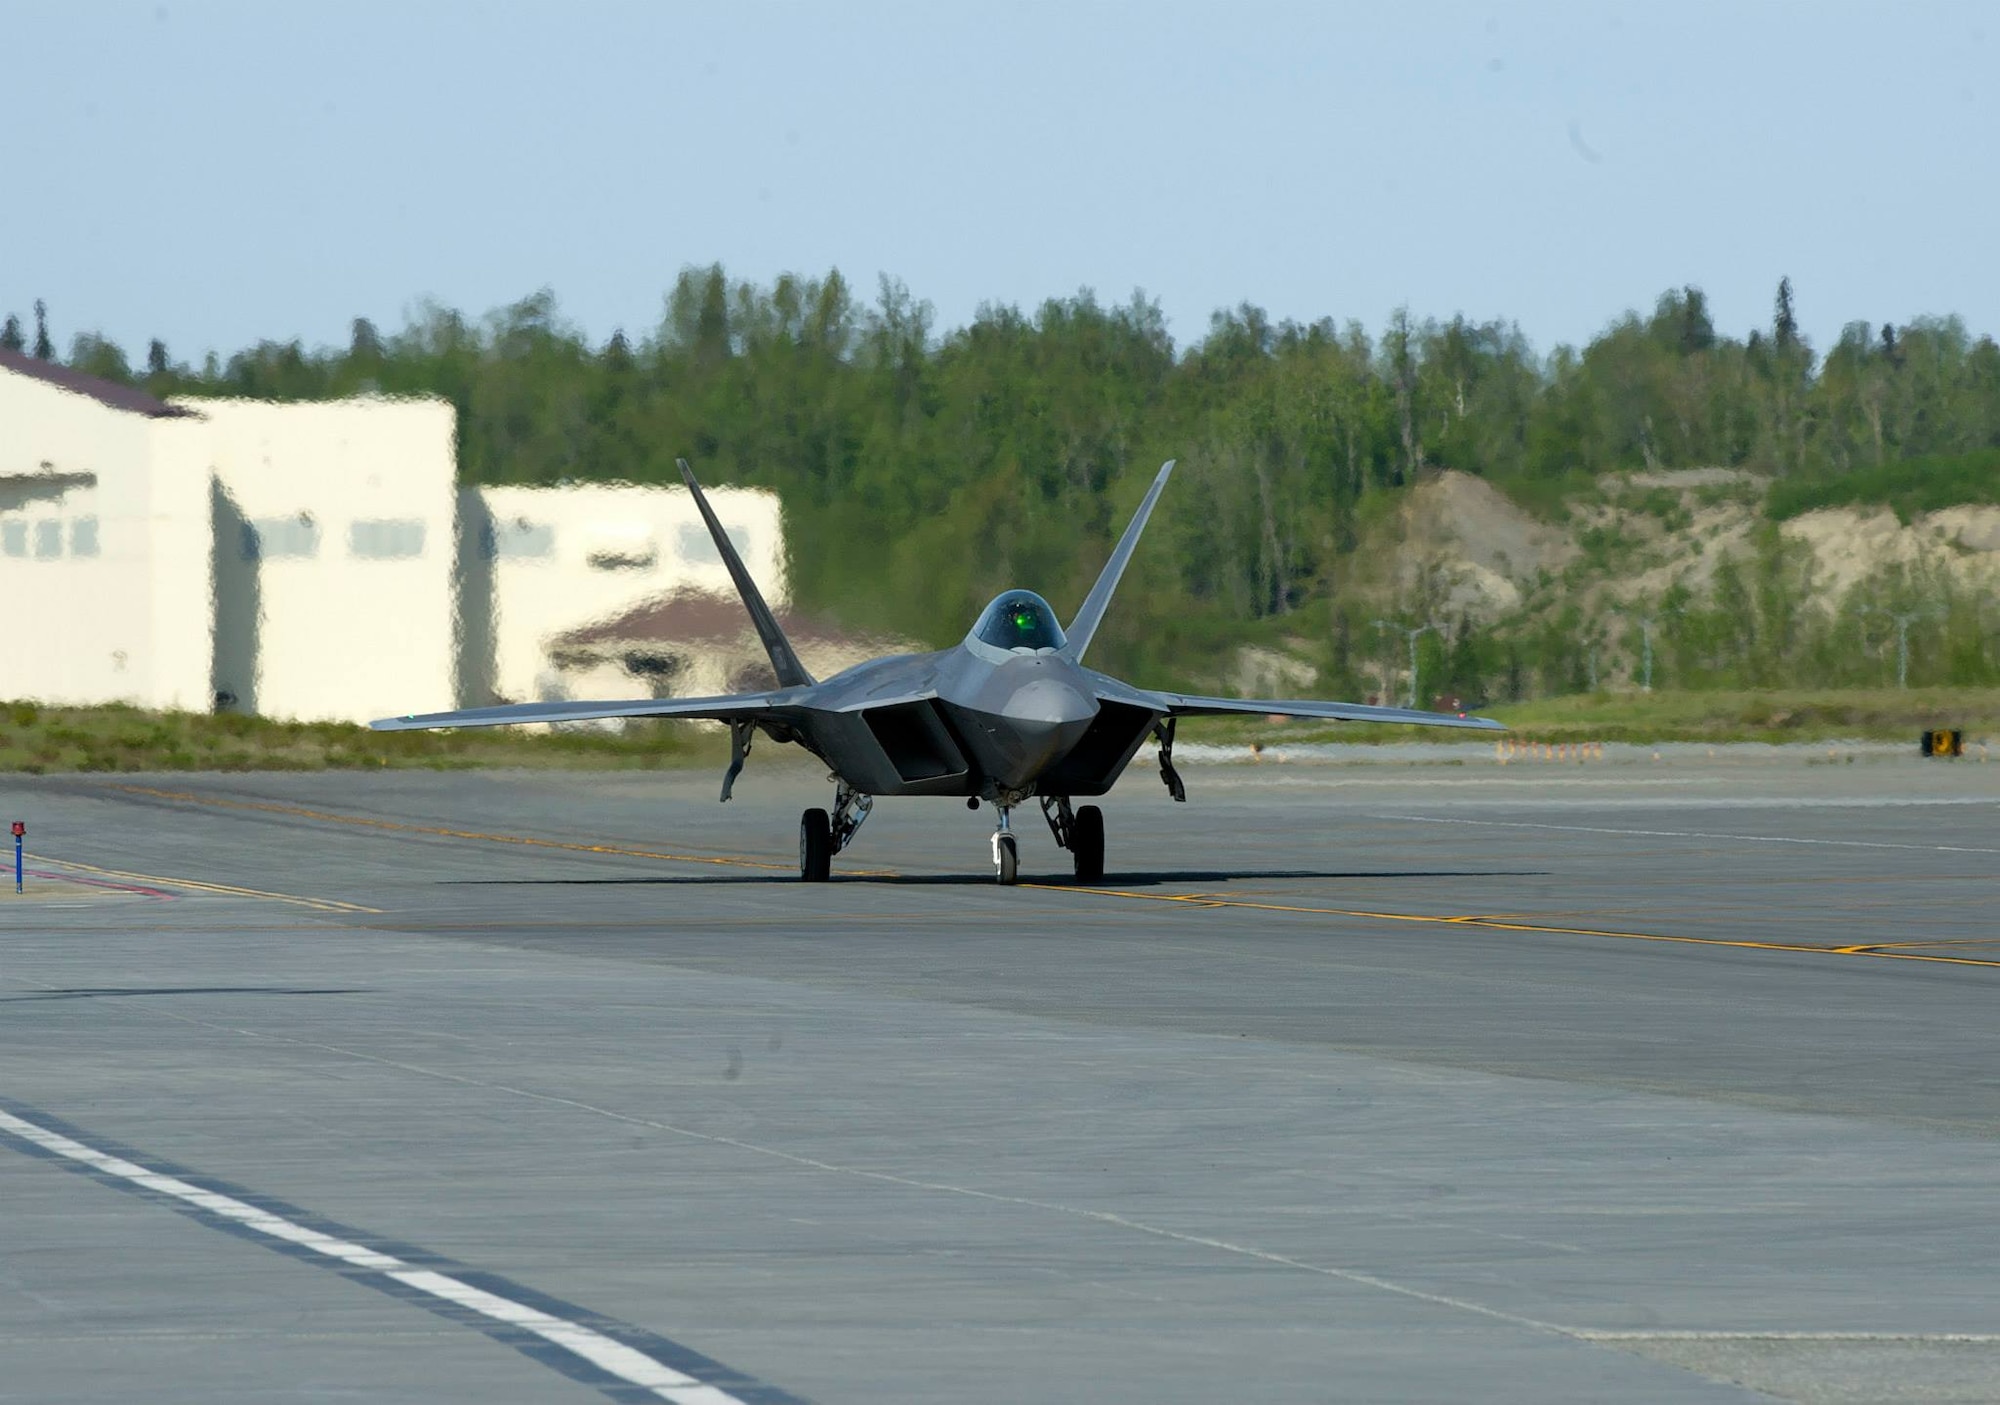 An F-22 Raptor taxis to its parking spot on Joint Base Elmendorf-Richardson, Alaska, May 14, 2014. The Raptor flew as part of Red Flag, which is conducted three to four times a year at JBER and Eielson Air Force Base. (U.S. Air Force photo/Staff Sgt. Zachary Wolf)